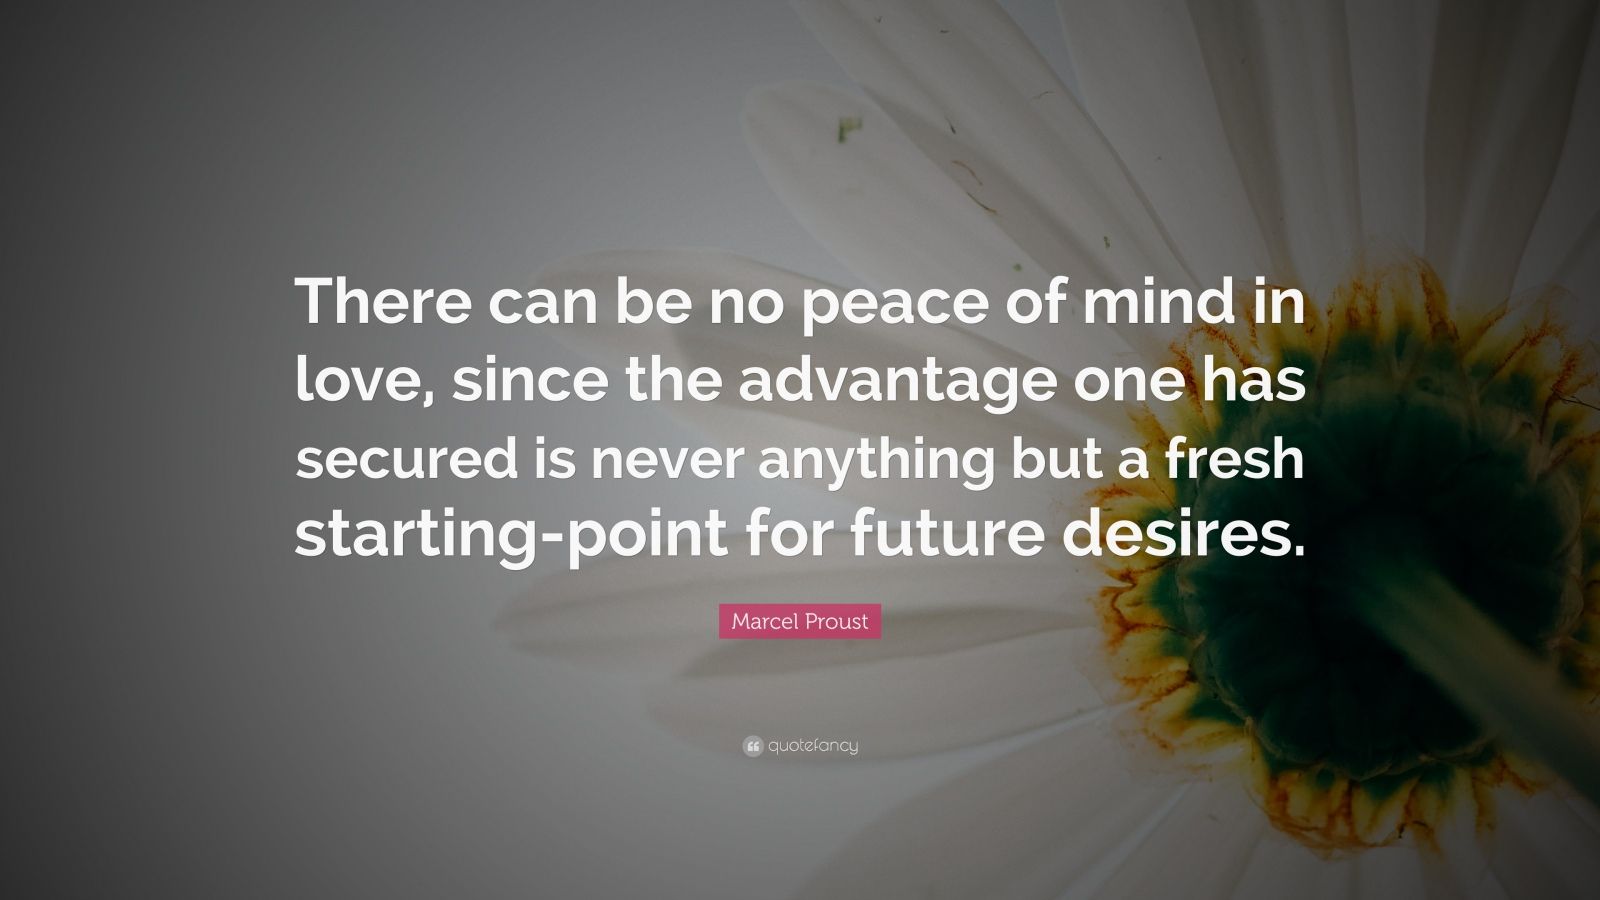 Marcel Proust Quote “There can be no peace of mind in love since